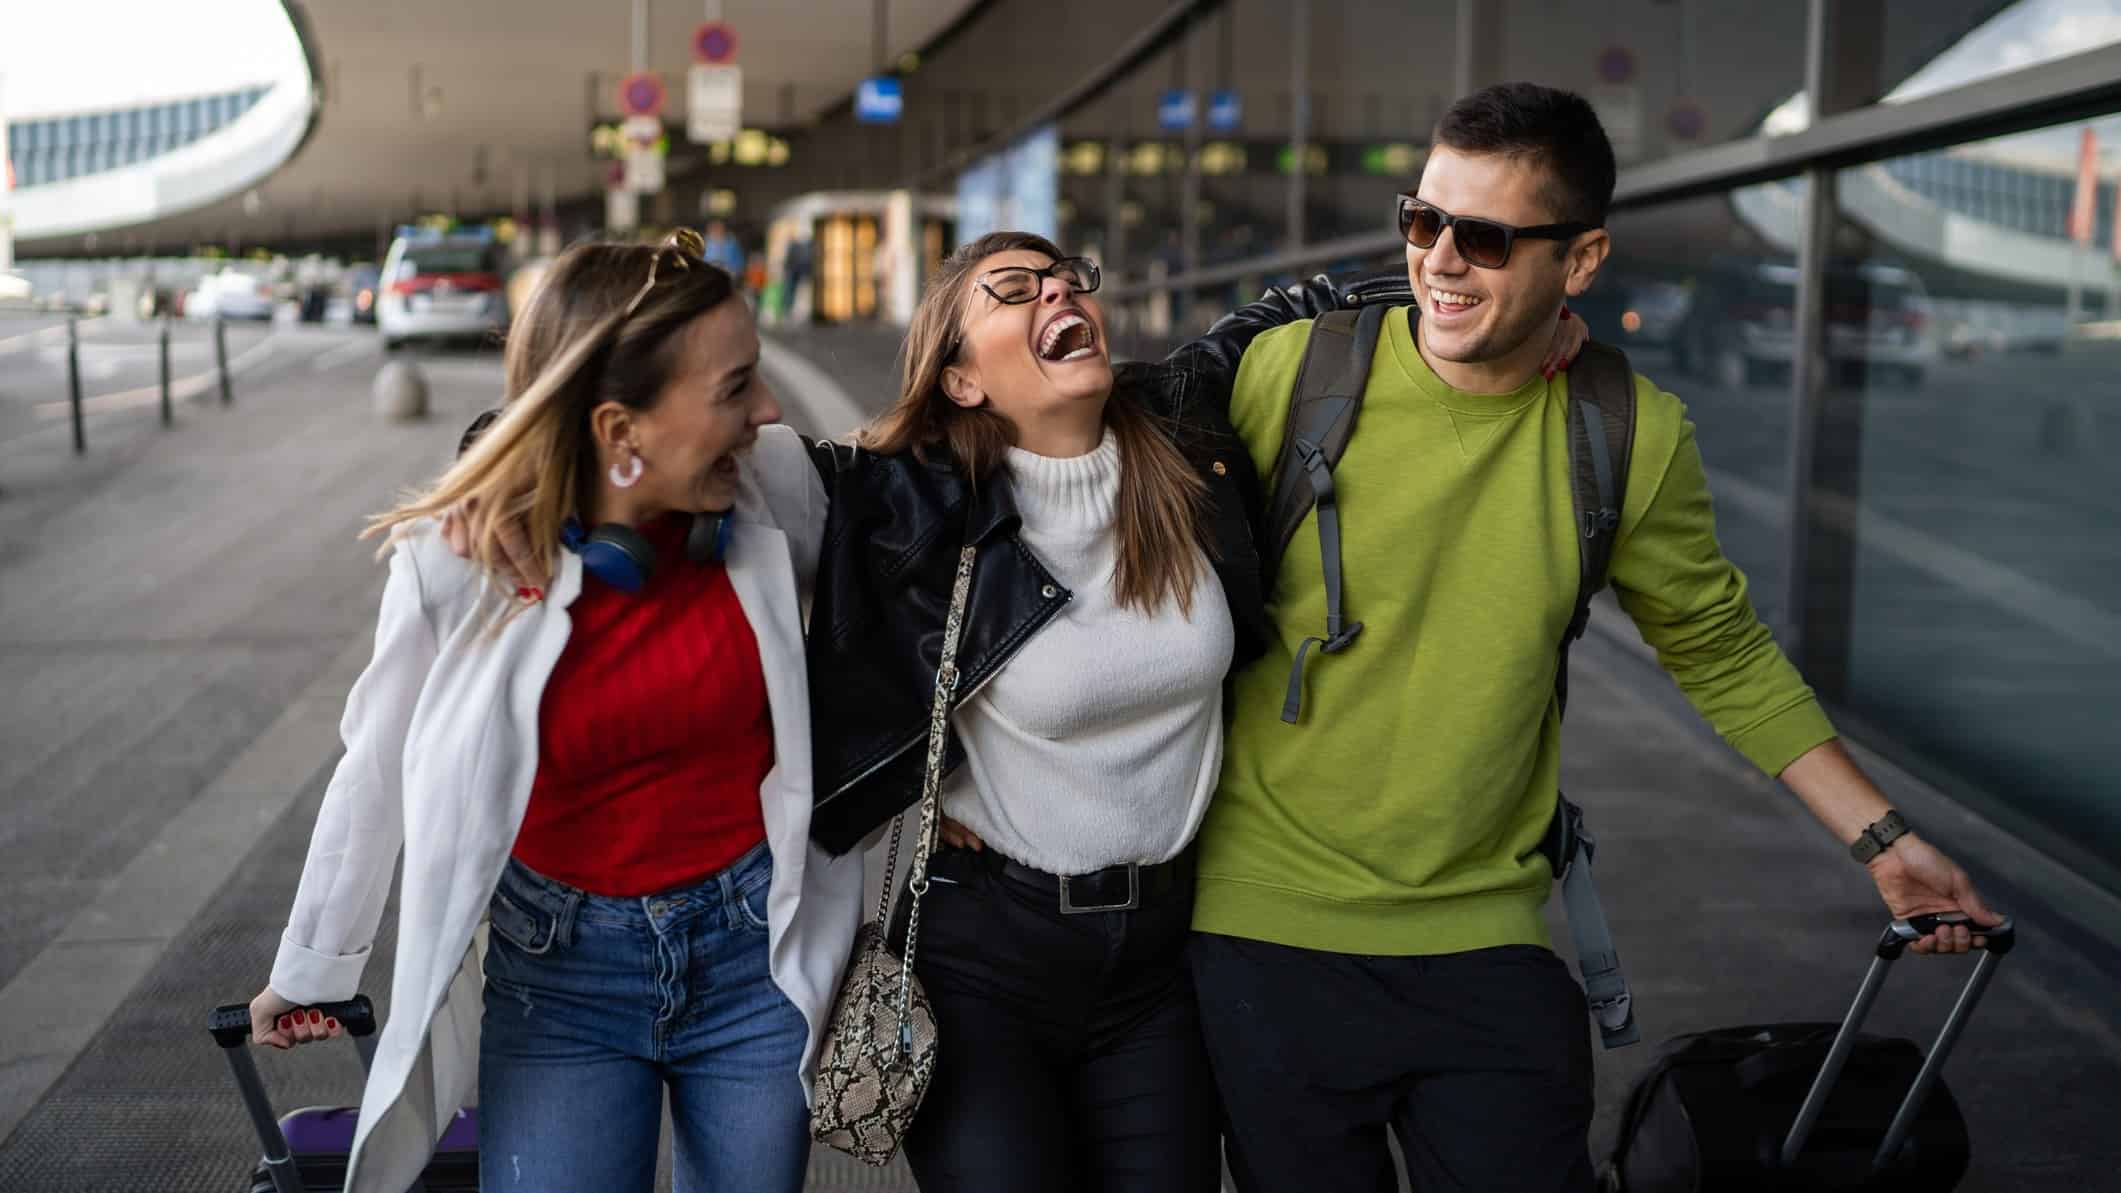 Three travellers laughing and smiling outside an airport